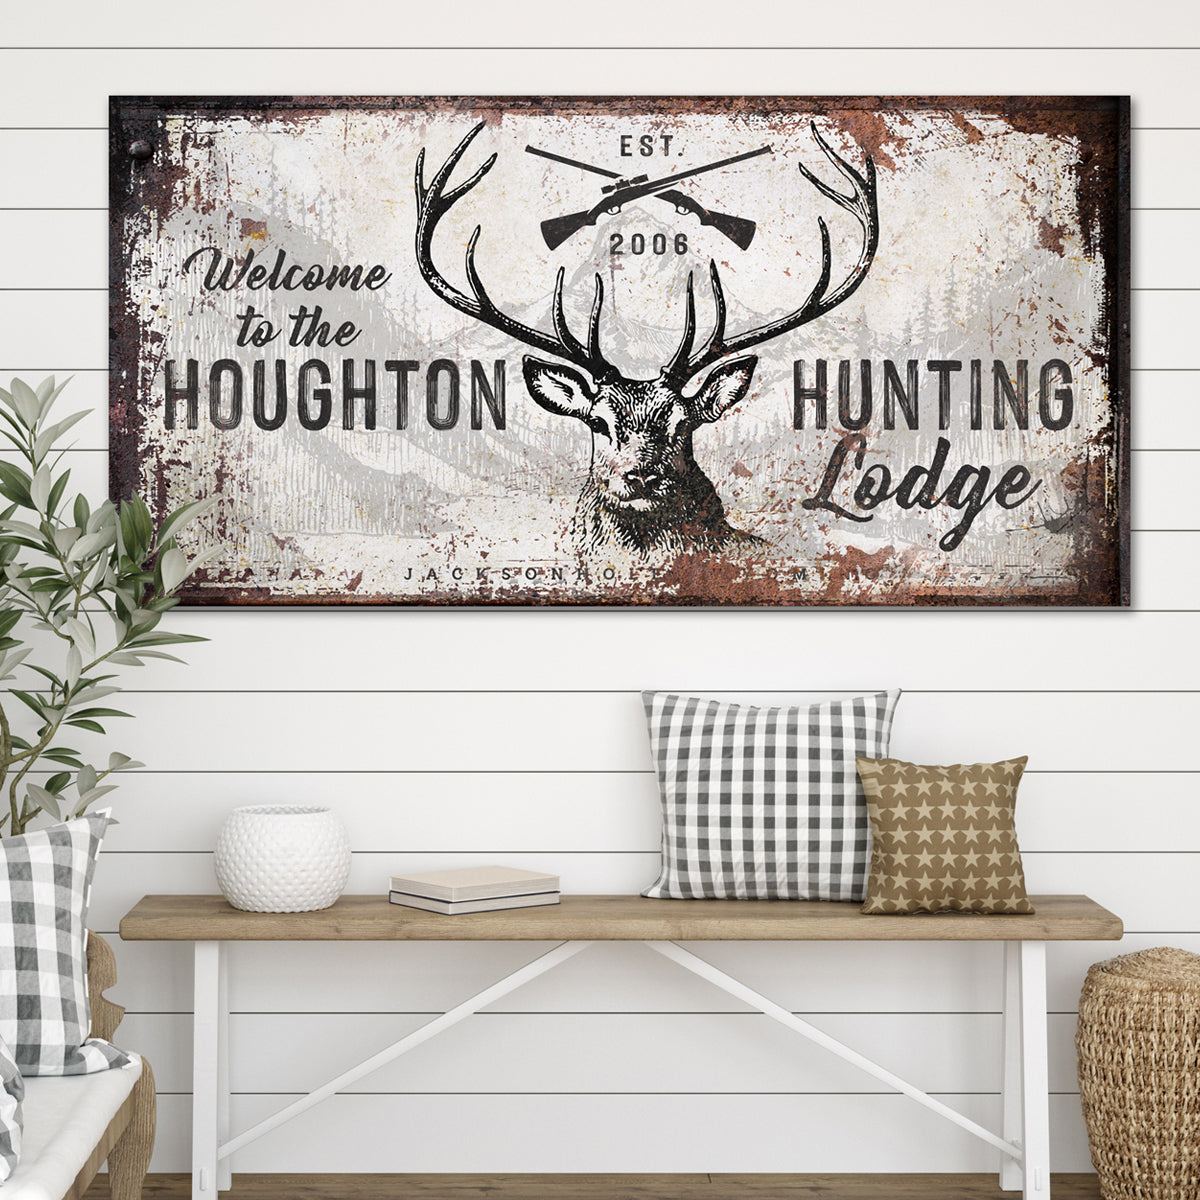 Reads [welcome to the {family name} hunting lodge. Est {your year} on metal or canvas designed to look distressed 